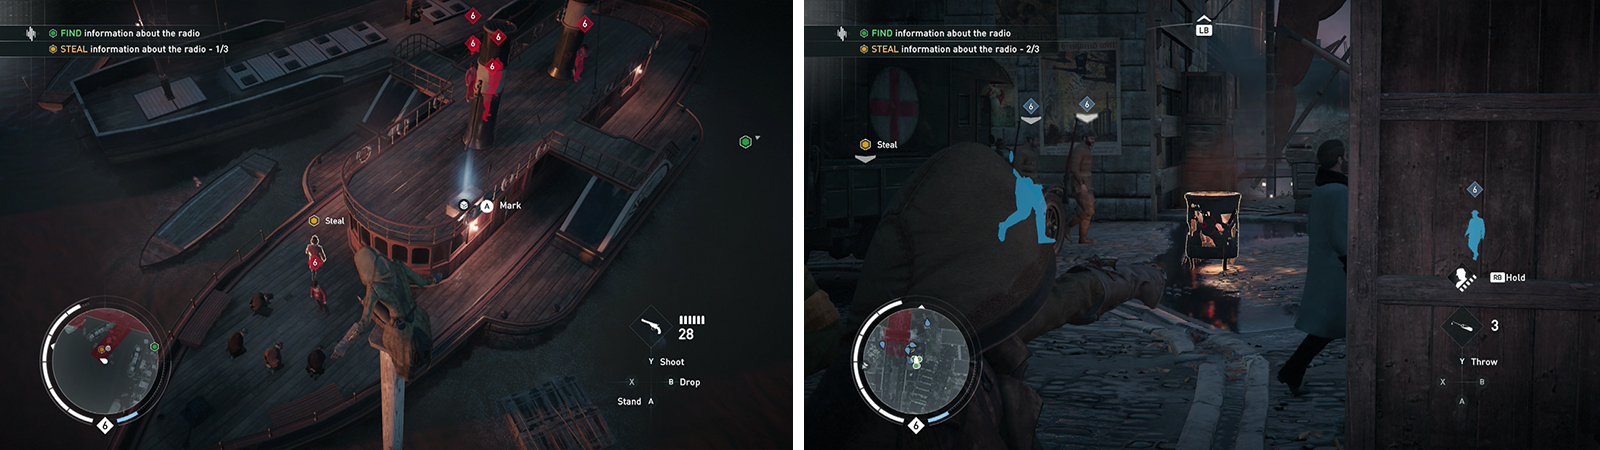 The second radio is on the deck of a ship near the bridge (left). The third is beneath the bridge and can be made easier using the darts (right).